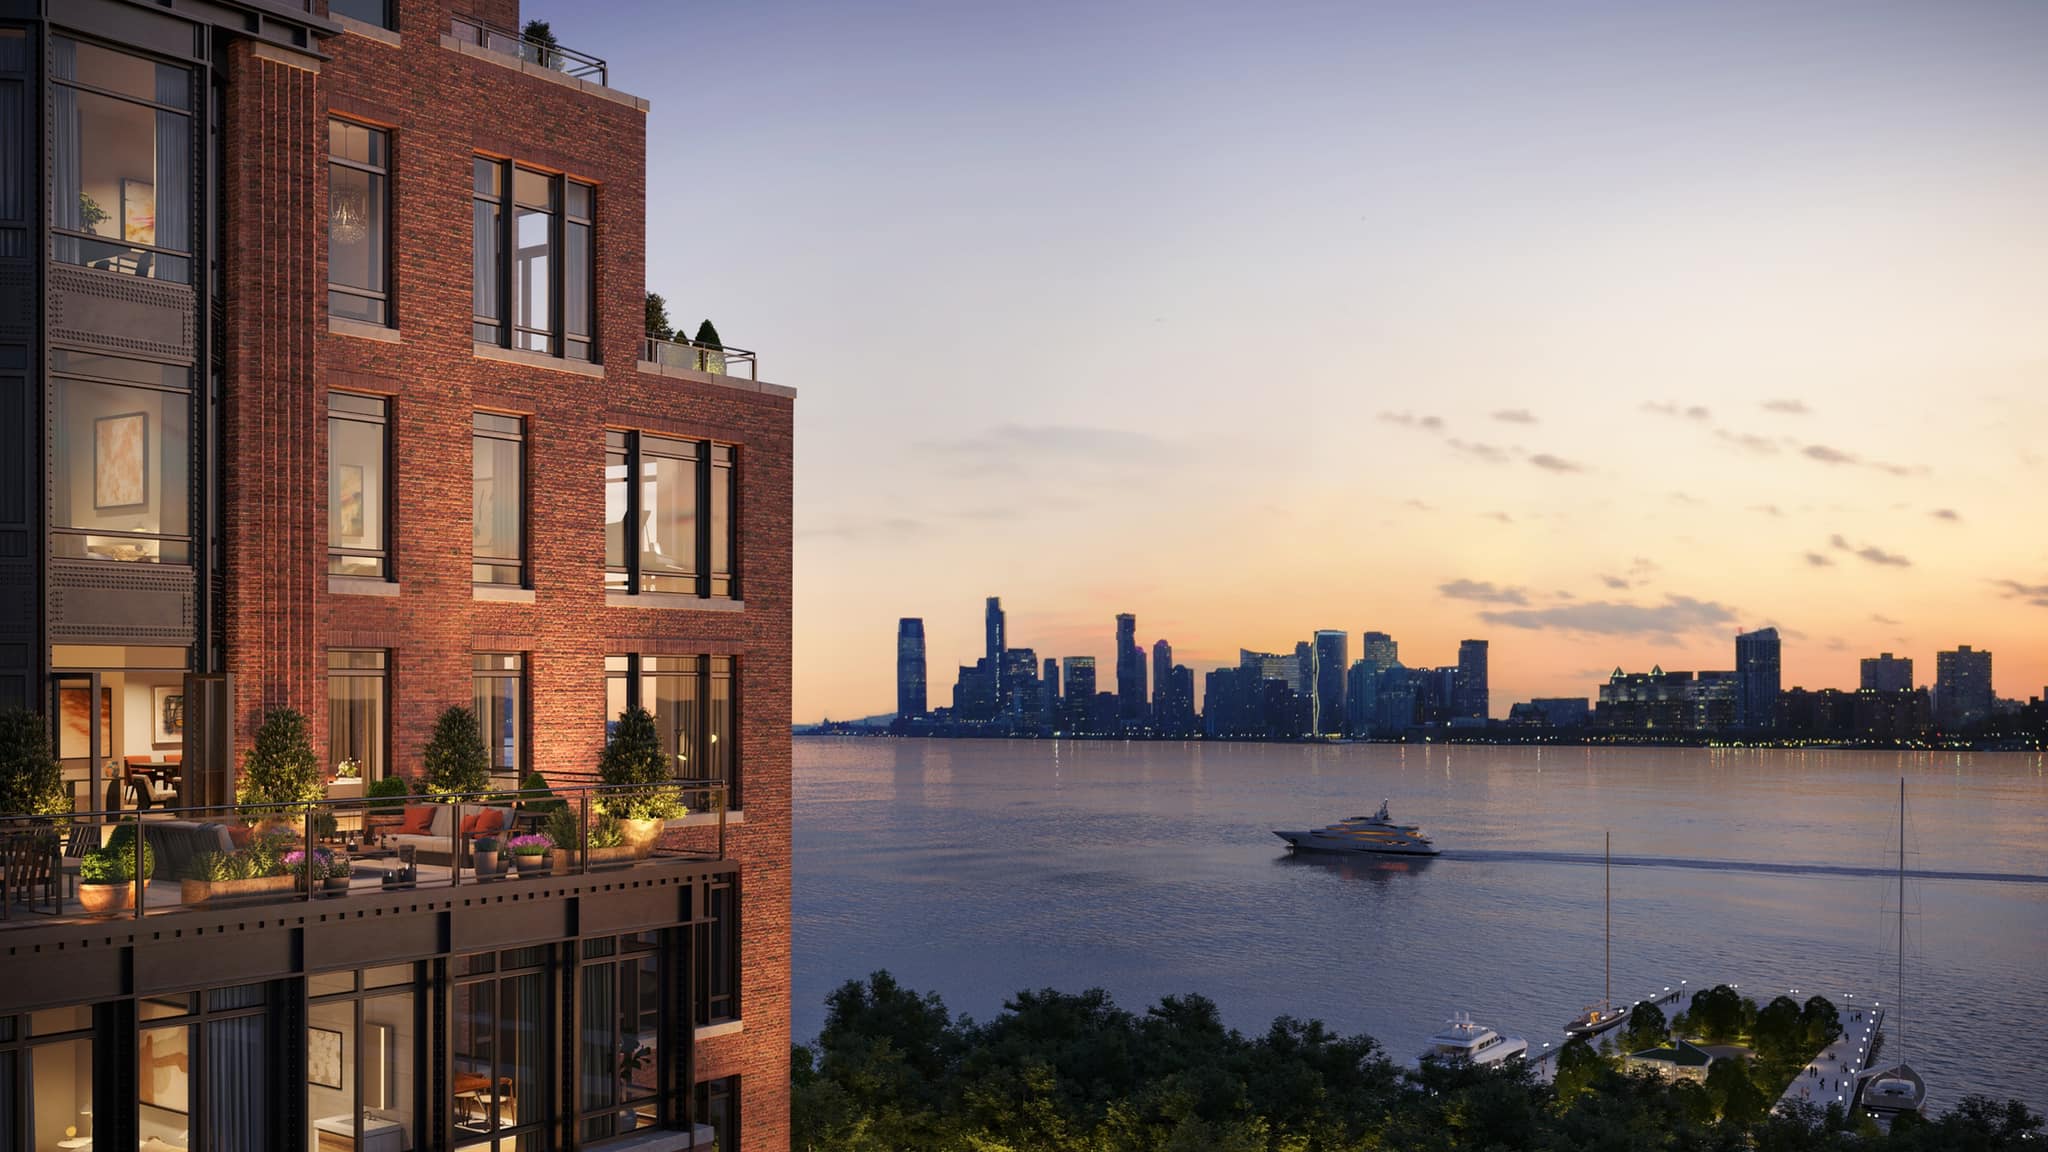 The Cortland brings waterfront living in one of New York’s most vibrant neighbourhoods